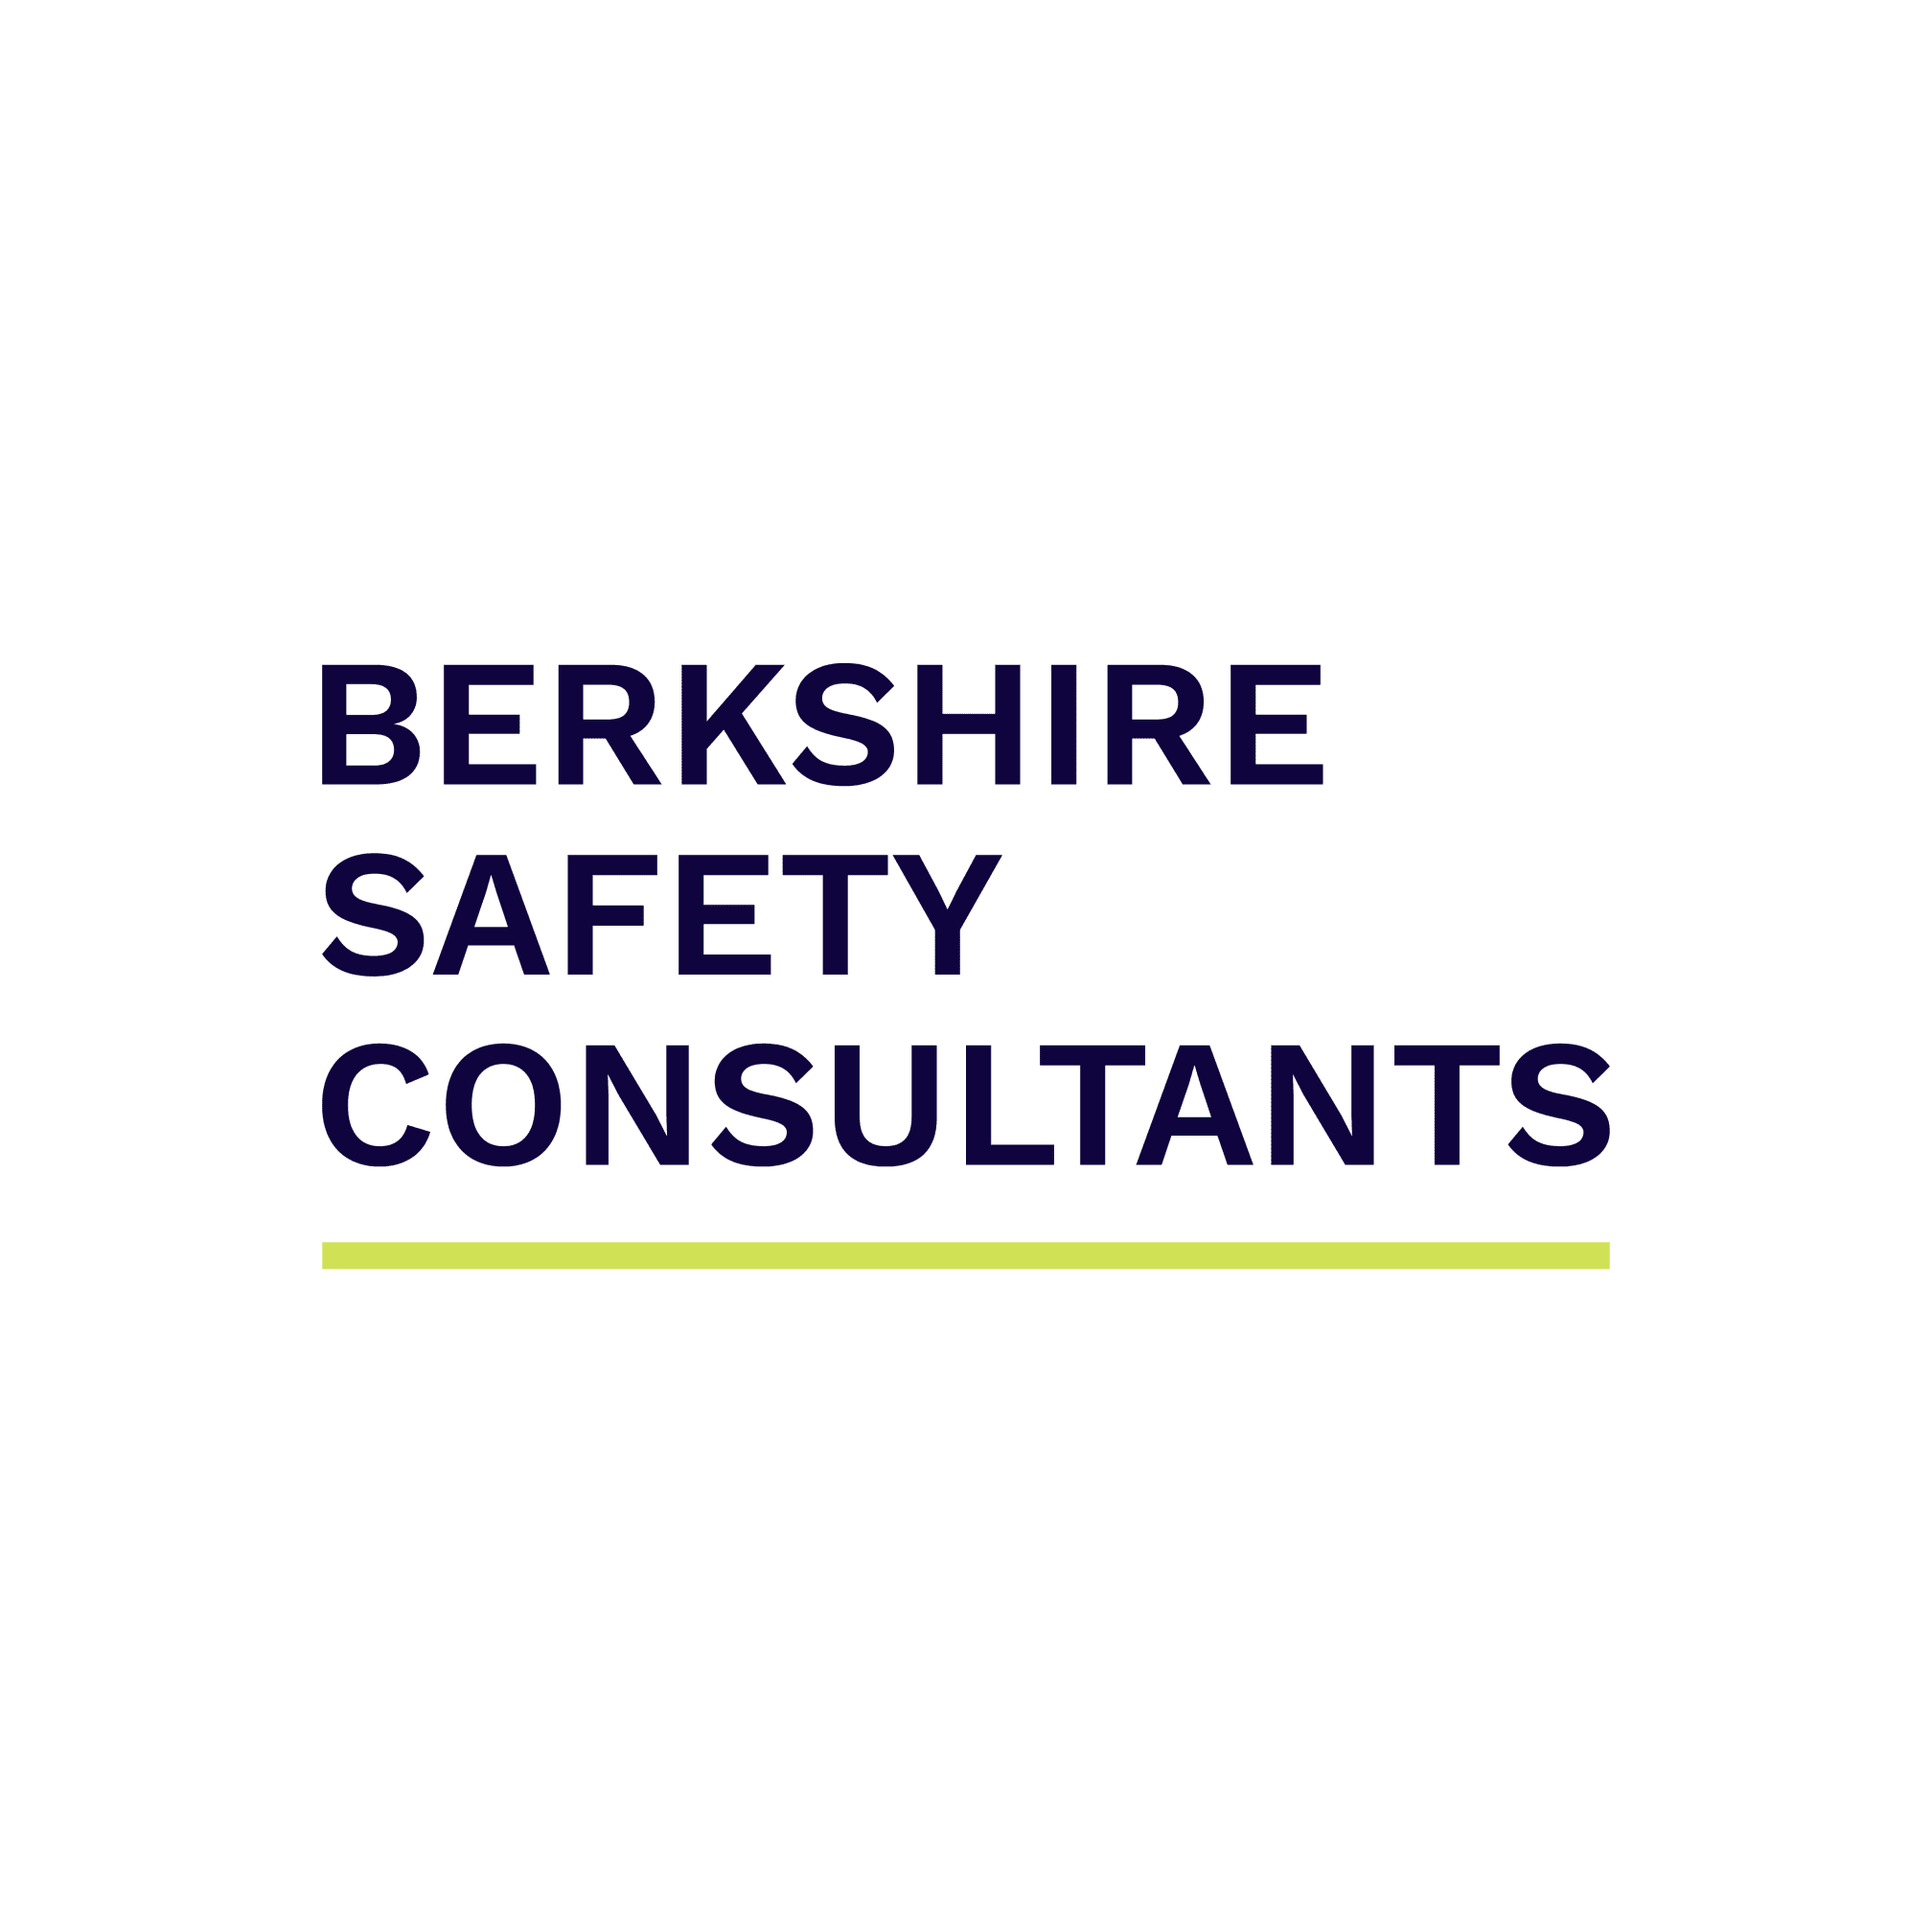 Berkshire Safety Consultants - London, London WC2H 9JQ - 07856 580182 | ShowMeLocal.com